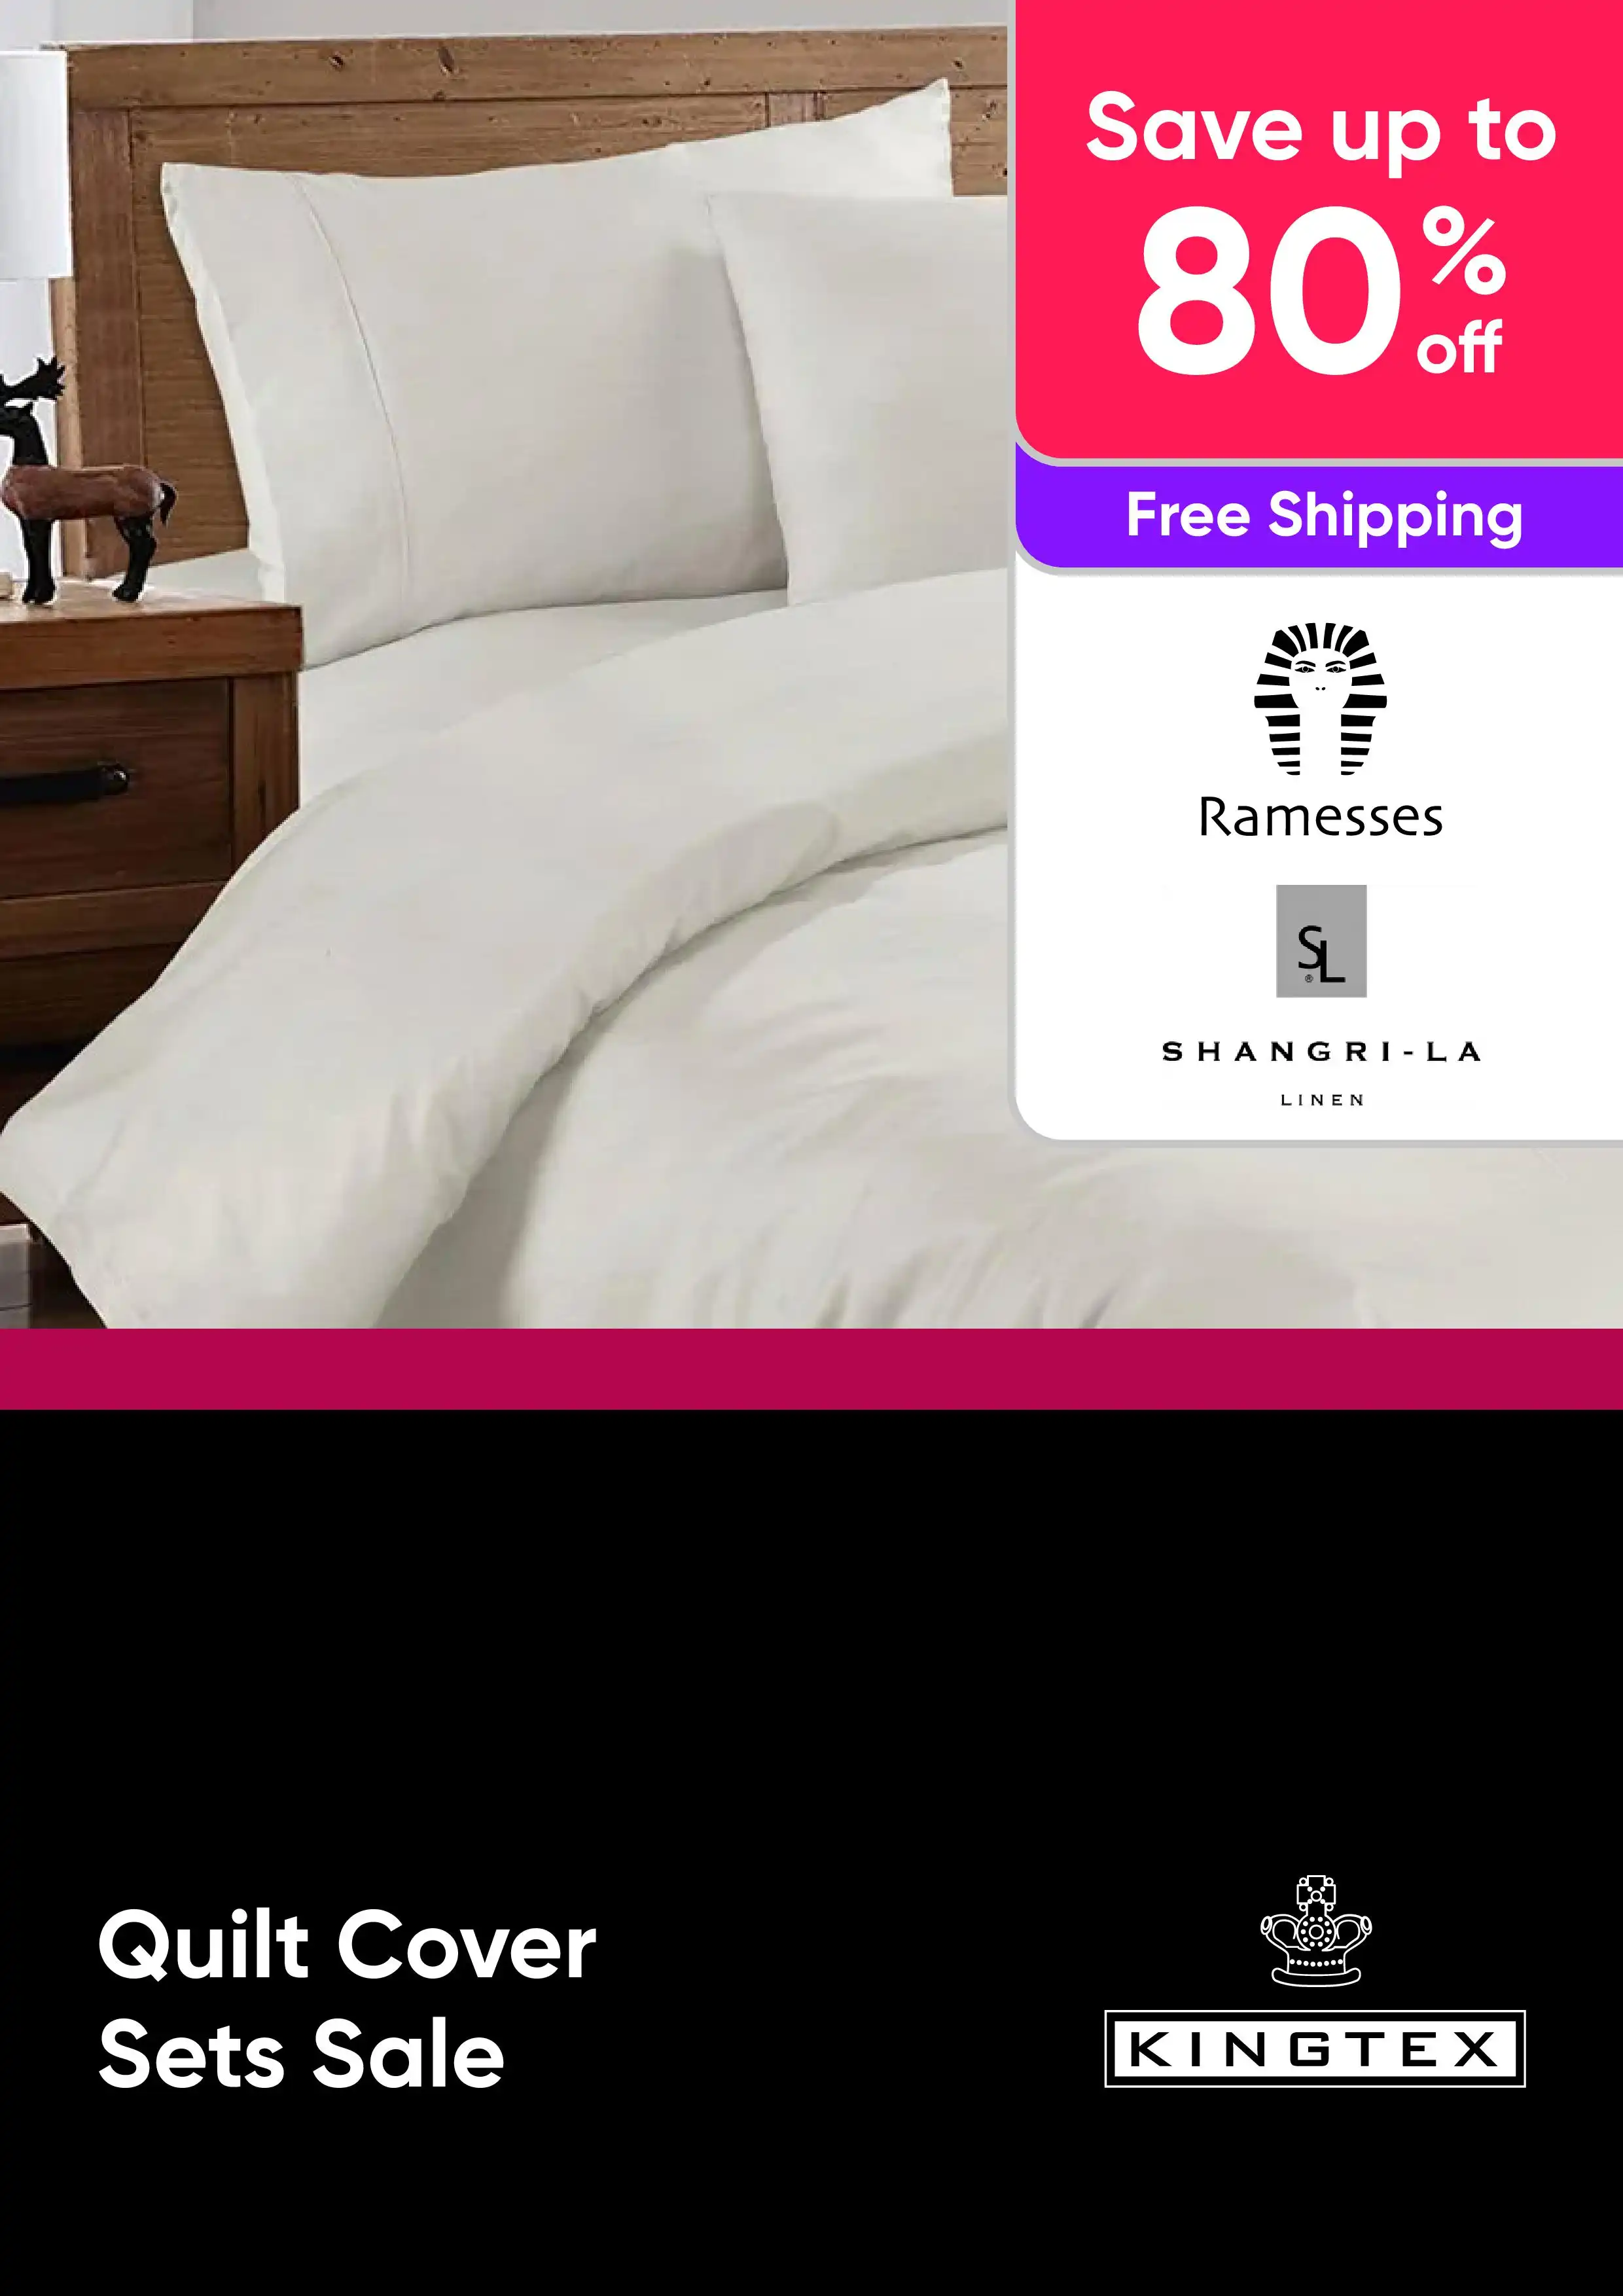 Quilt Cover Sets Sale - Up to 80% Off